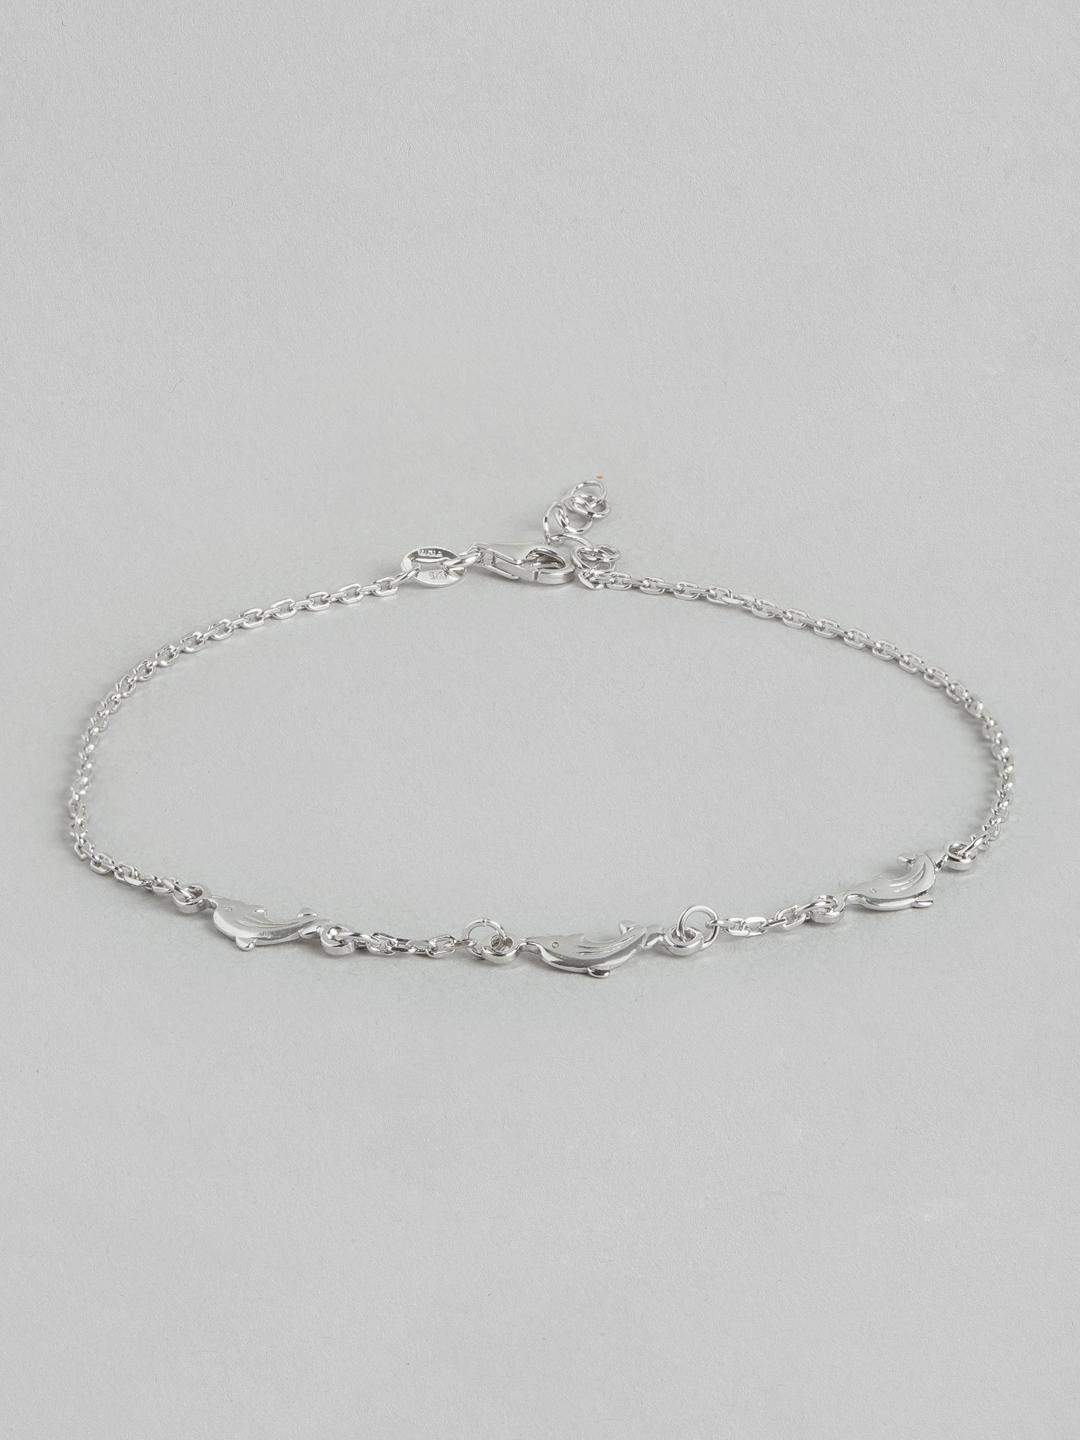 carlton-london-925-sterling-silver-rhodium-plated-with-inline-dolphin-adjustable-anklet